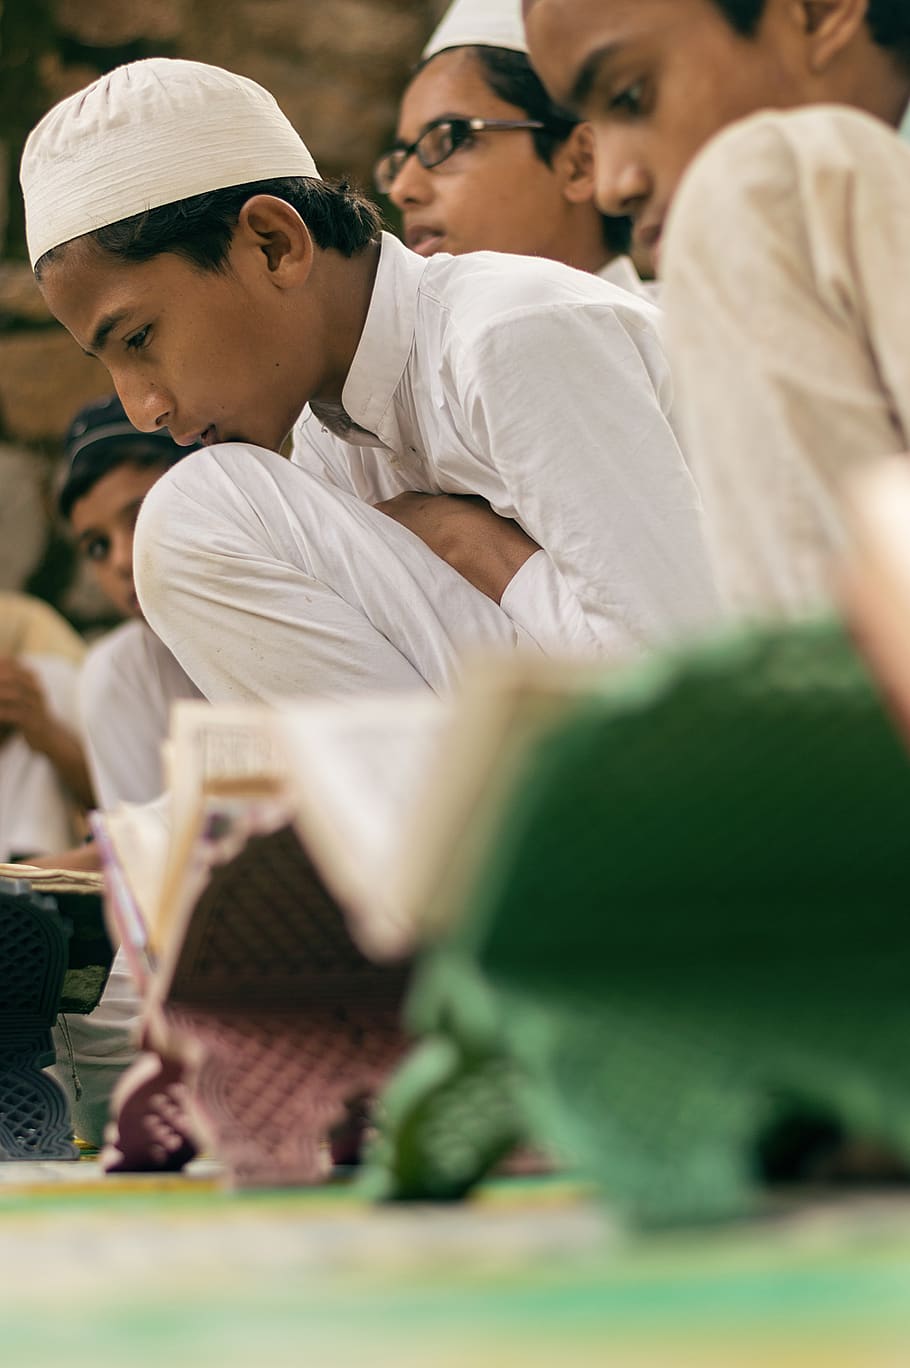 muslim boy, reading quran, india, young boy, men, selective focus, group of people, child, real people, people